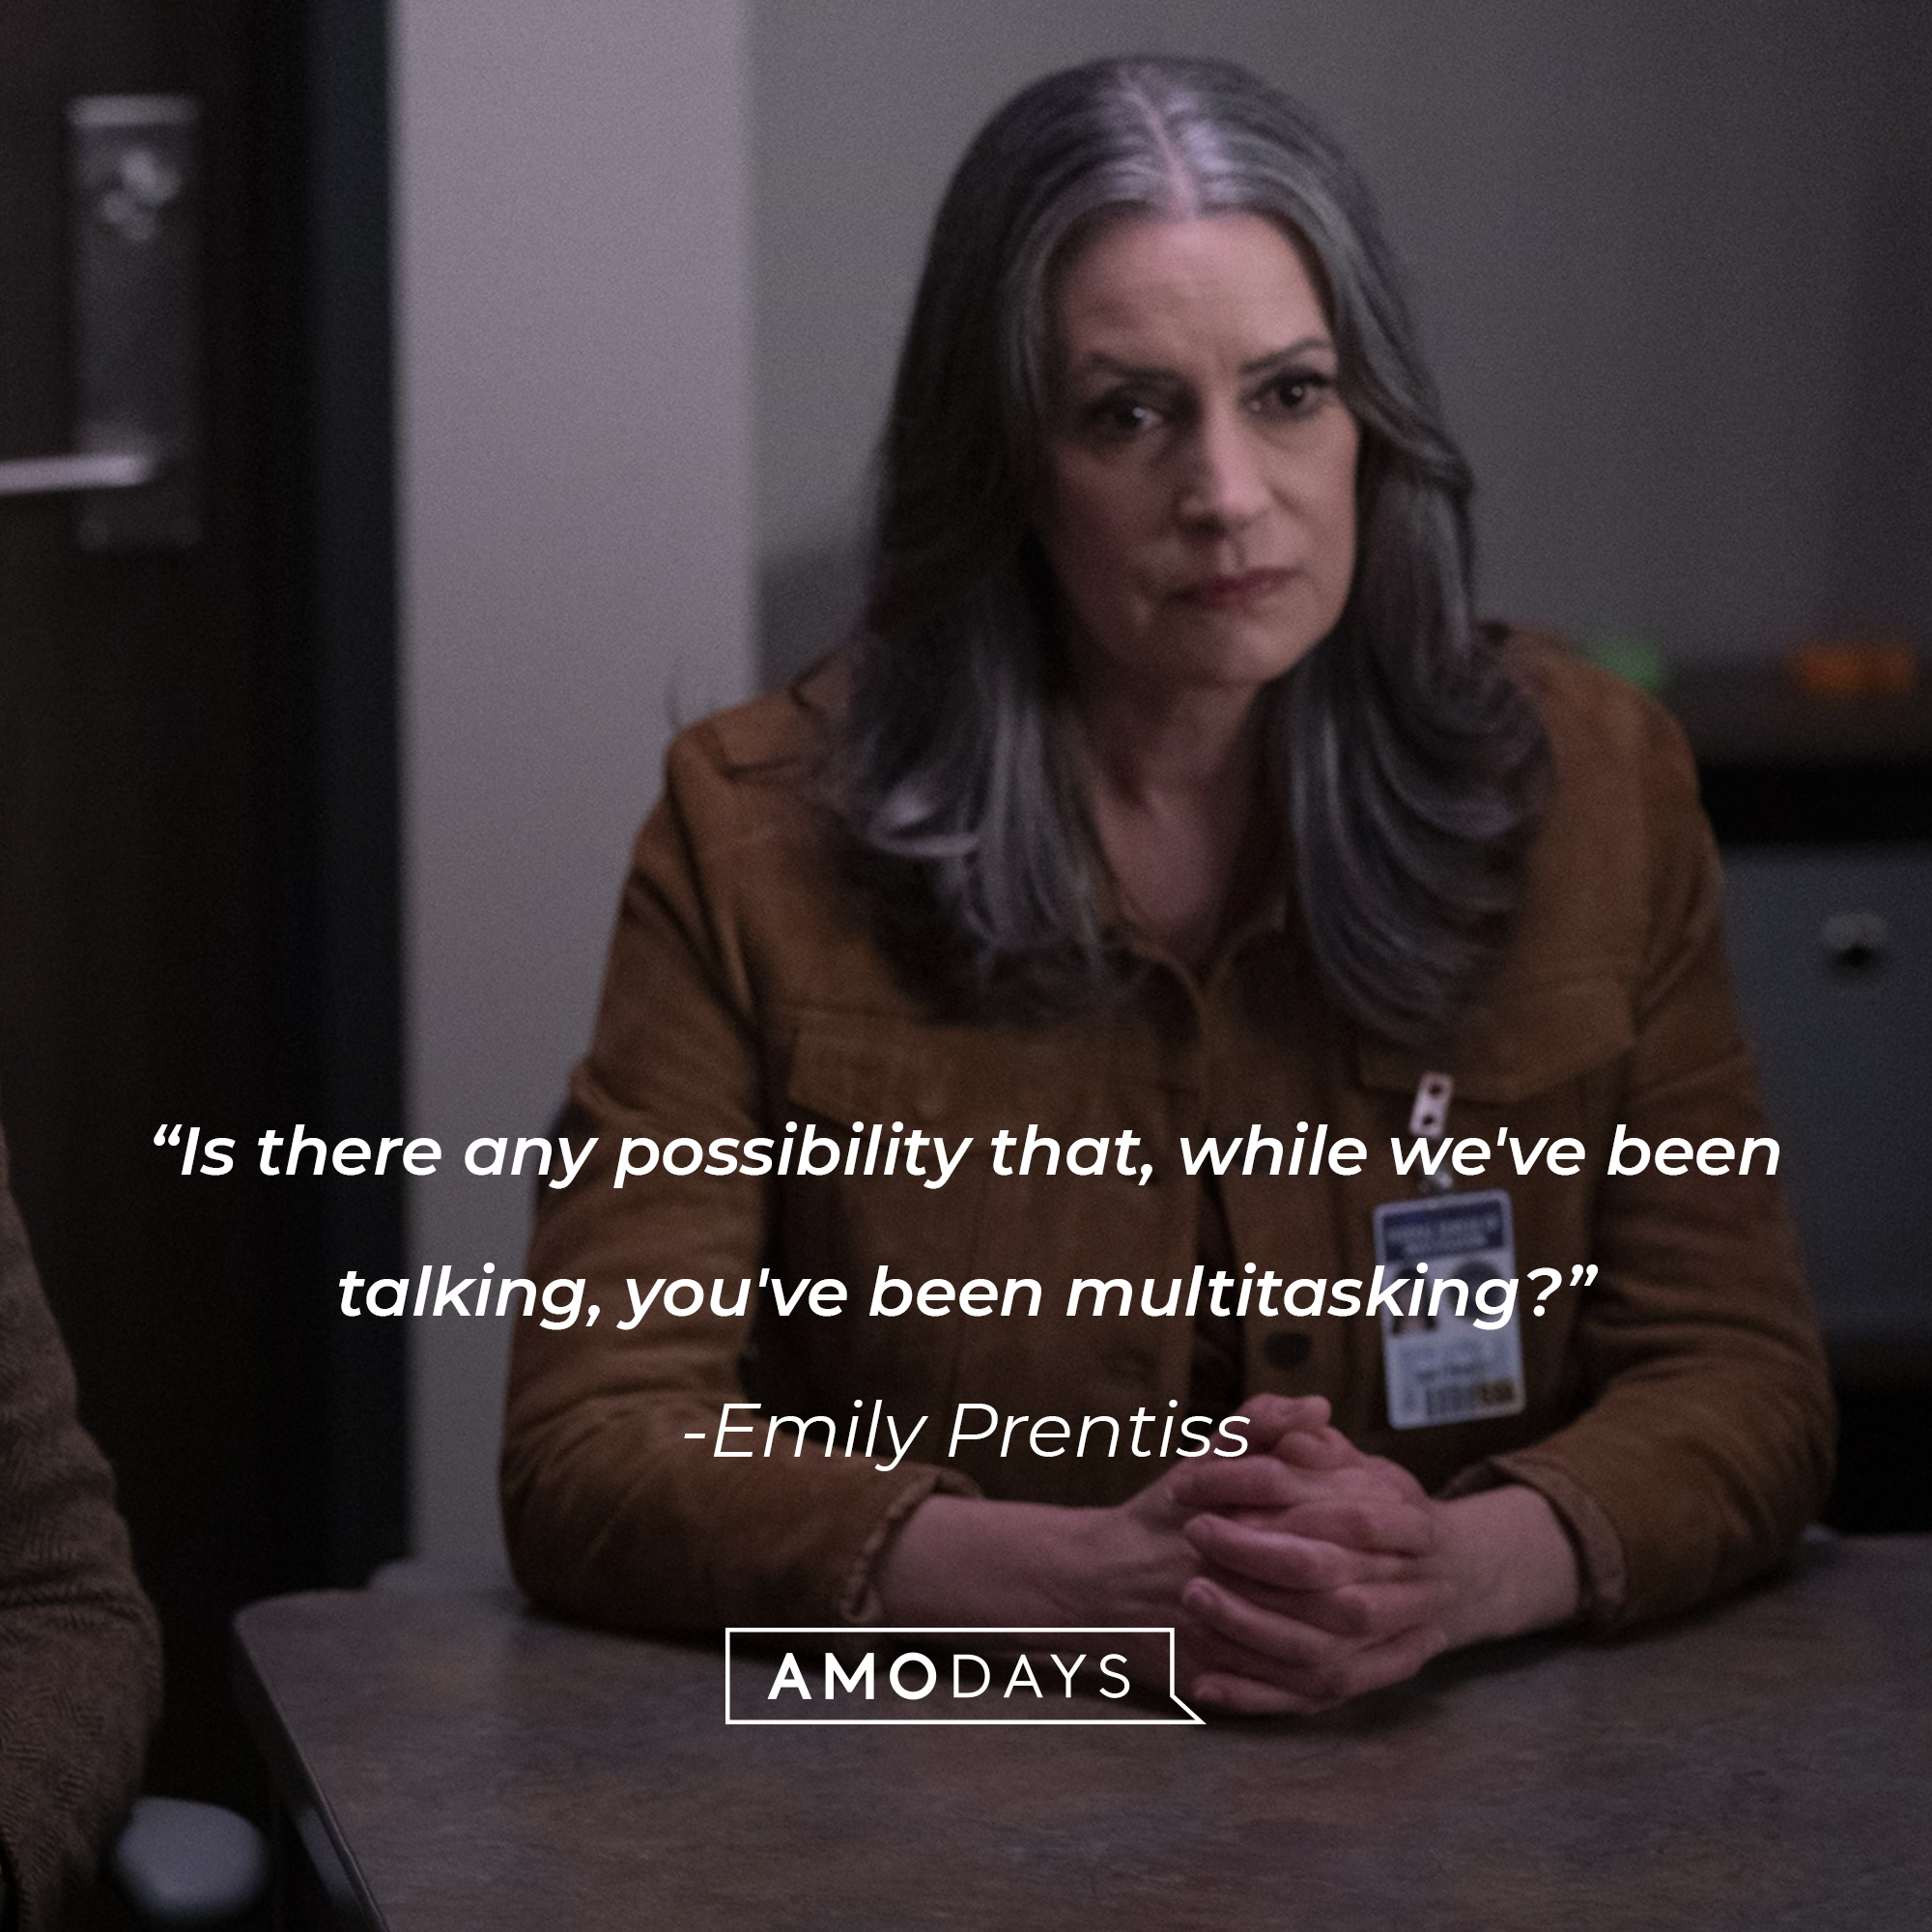 Emily Prentiss' quote: "Is there any possibility that, while we've been talking, you've been multitasking?" | Source: Facebook.com/CriminalMinds